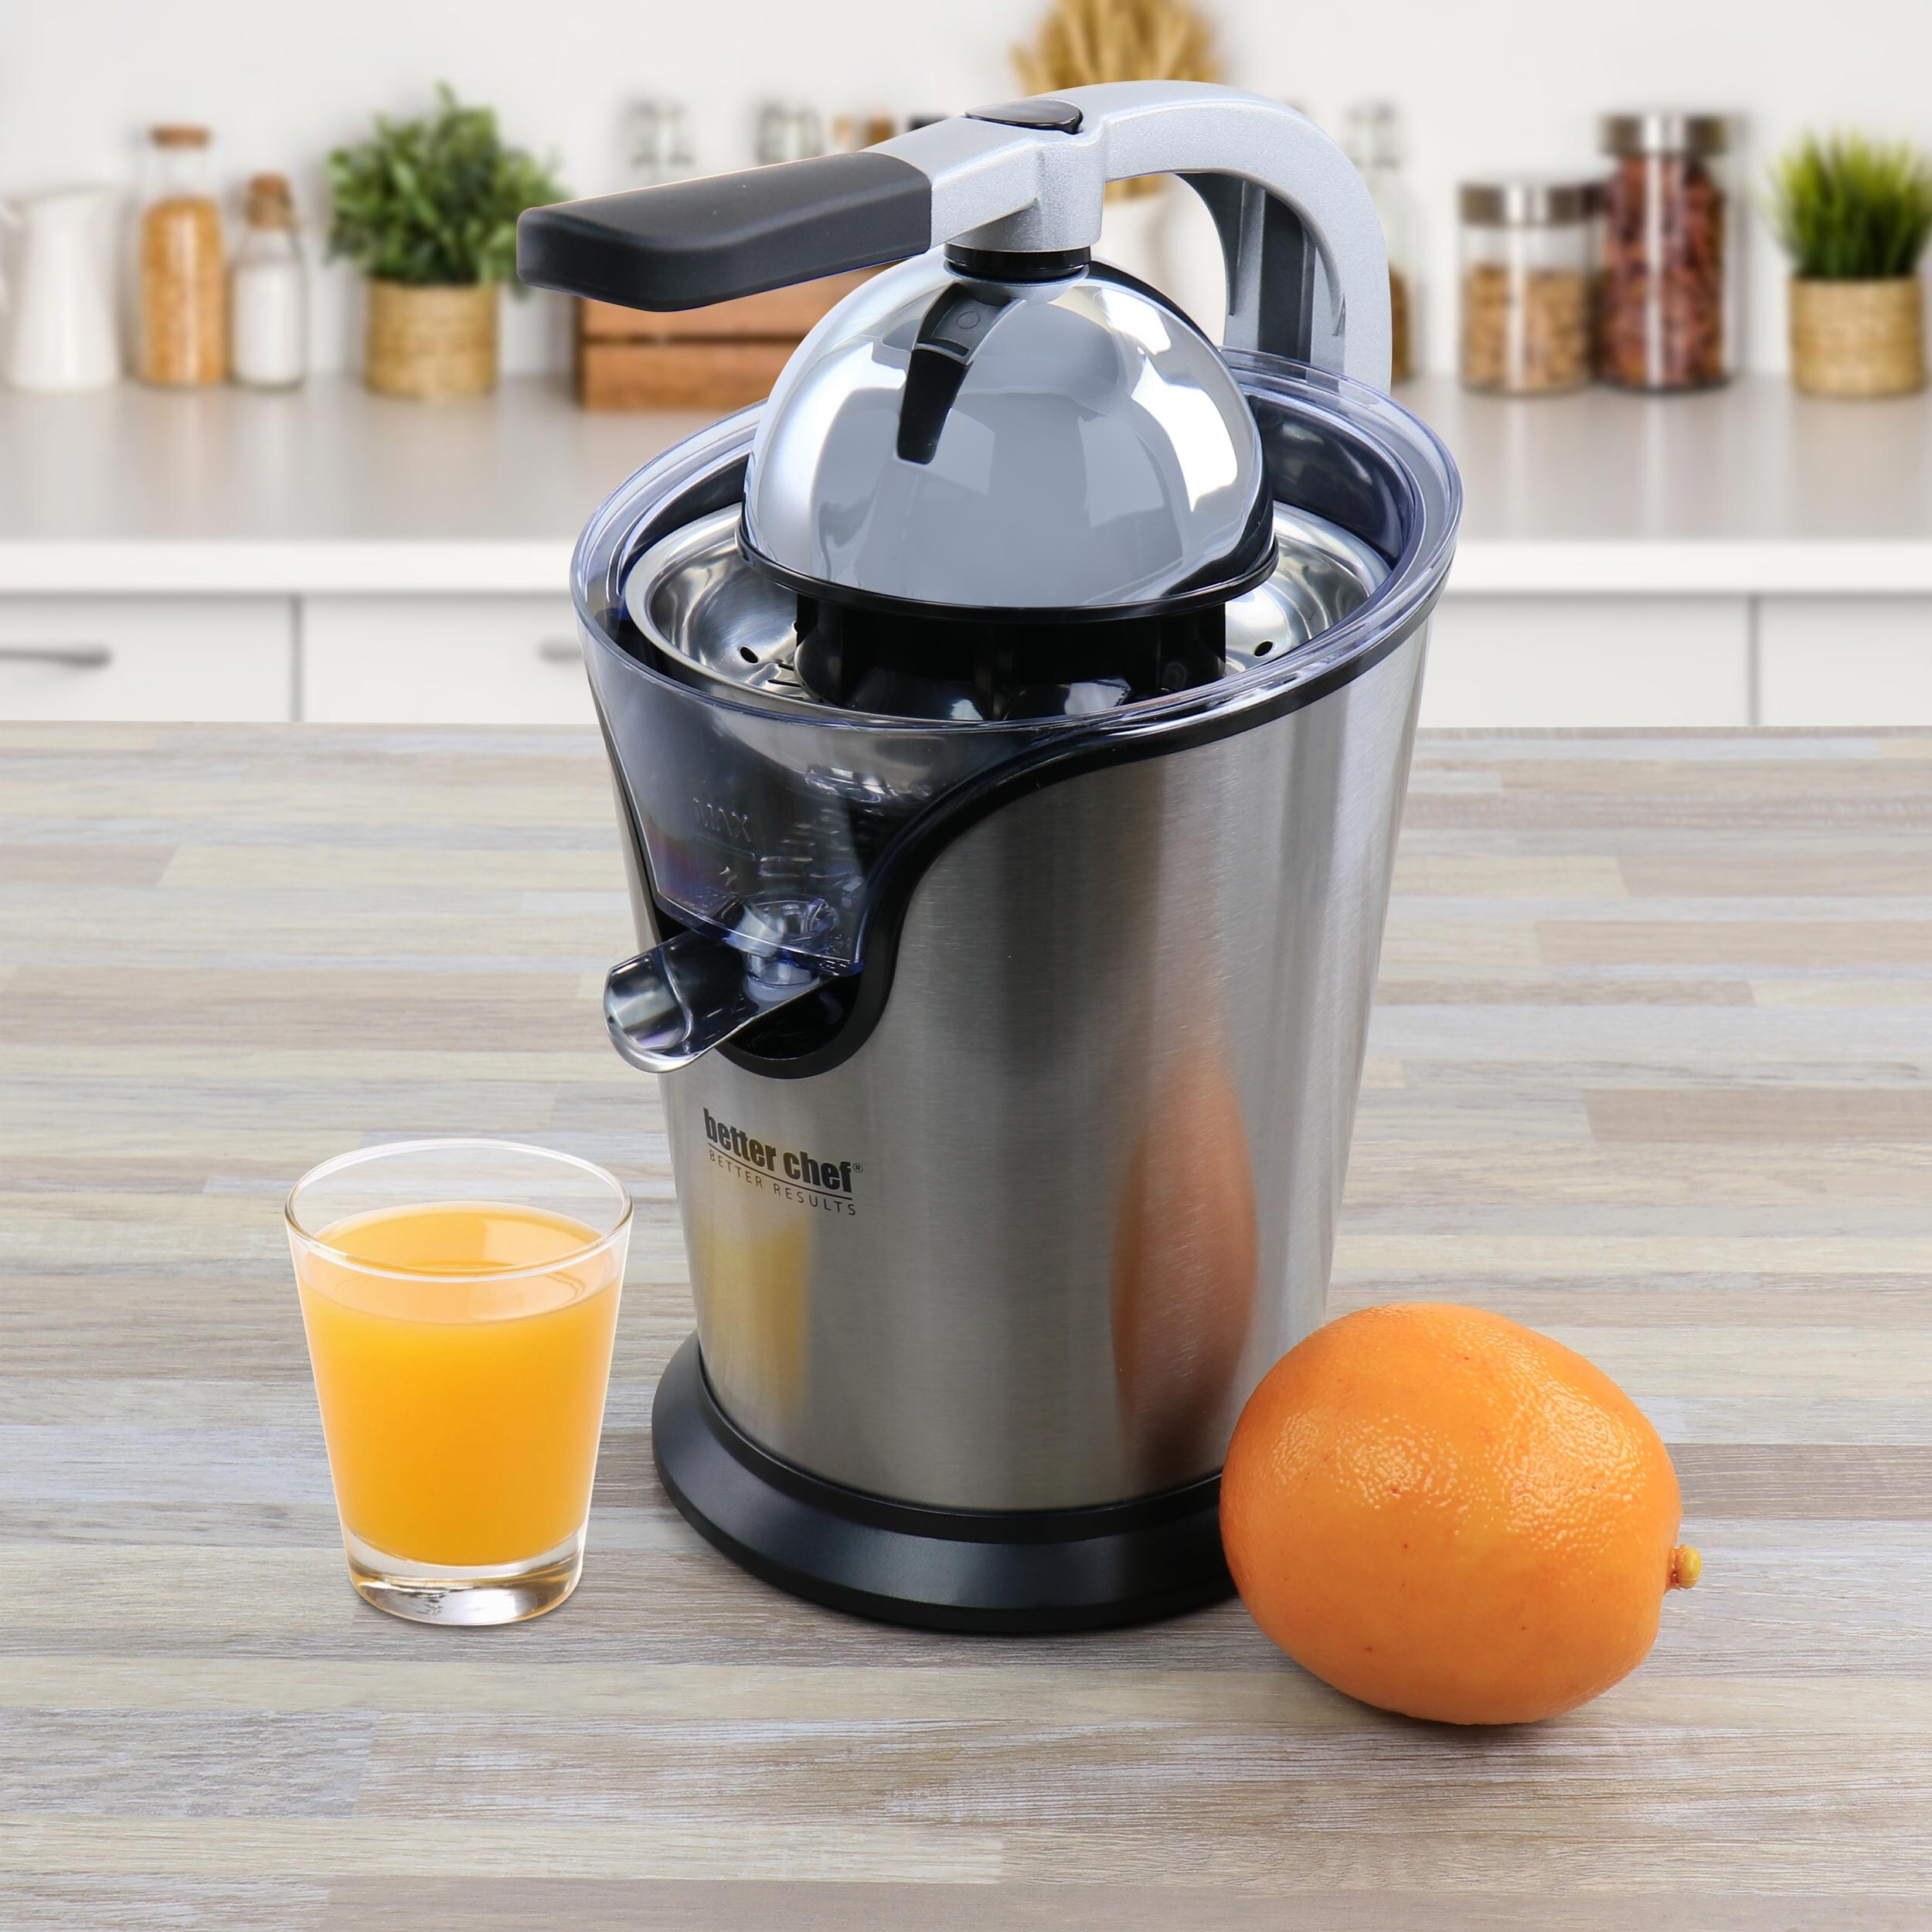 https://ak1.ostkcdn.com/images/products/is/images/direct/f566de877d6337c1aff6f49fd9c66c1c12fdb84b/Better-Chef-Stainless-Steel-Electric-Juice-Press.jpg